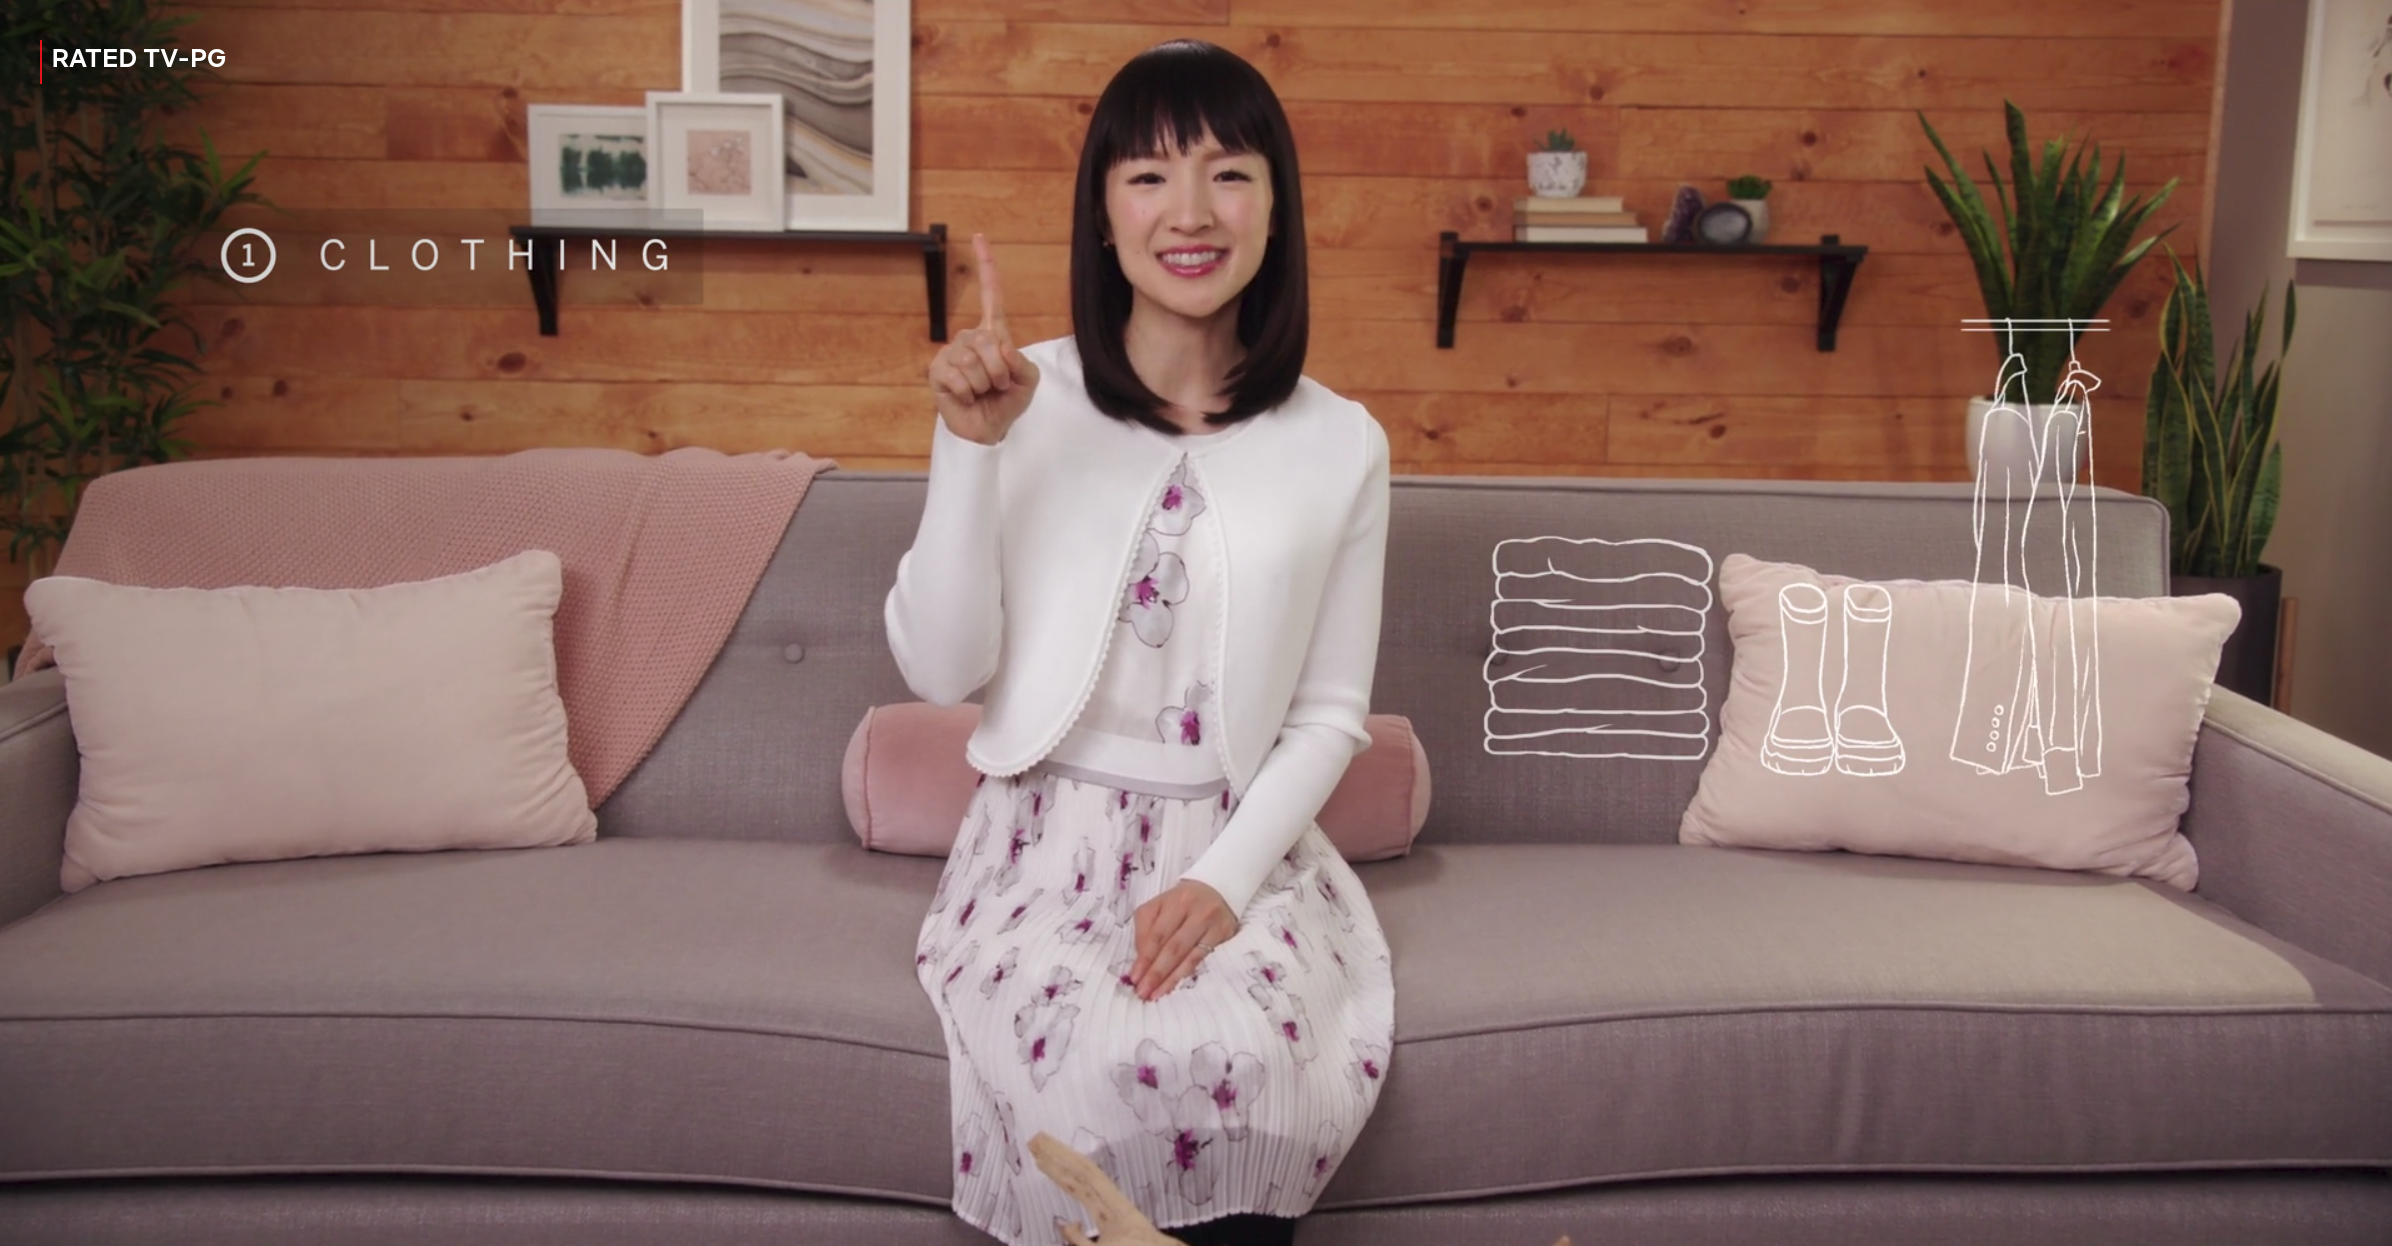 Netflix Orders Eight-Episode Reality Show From Marie Kondo